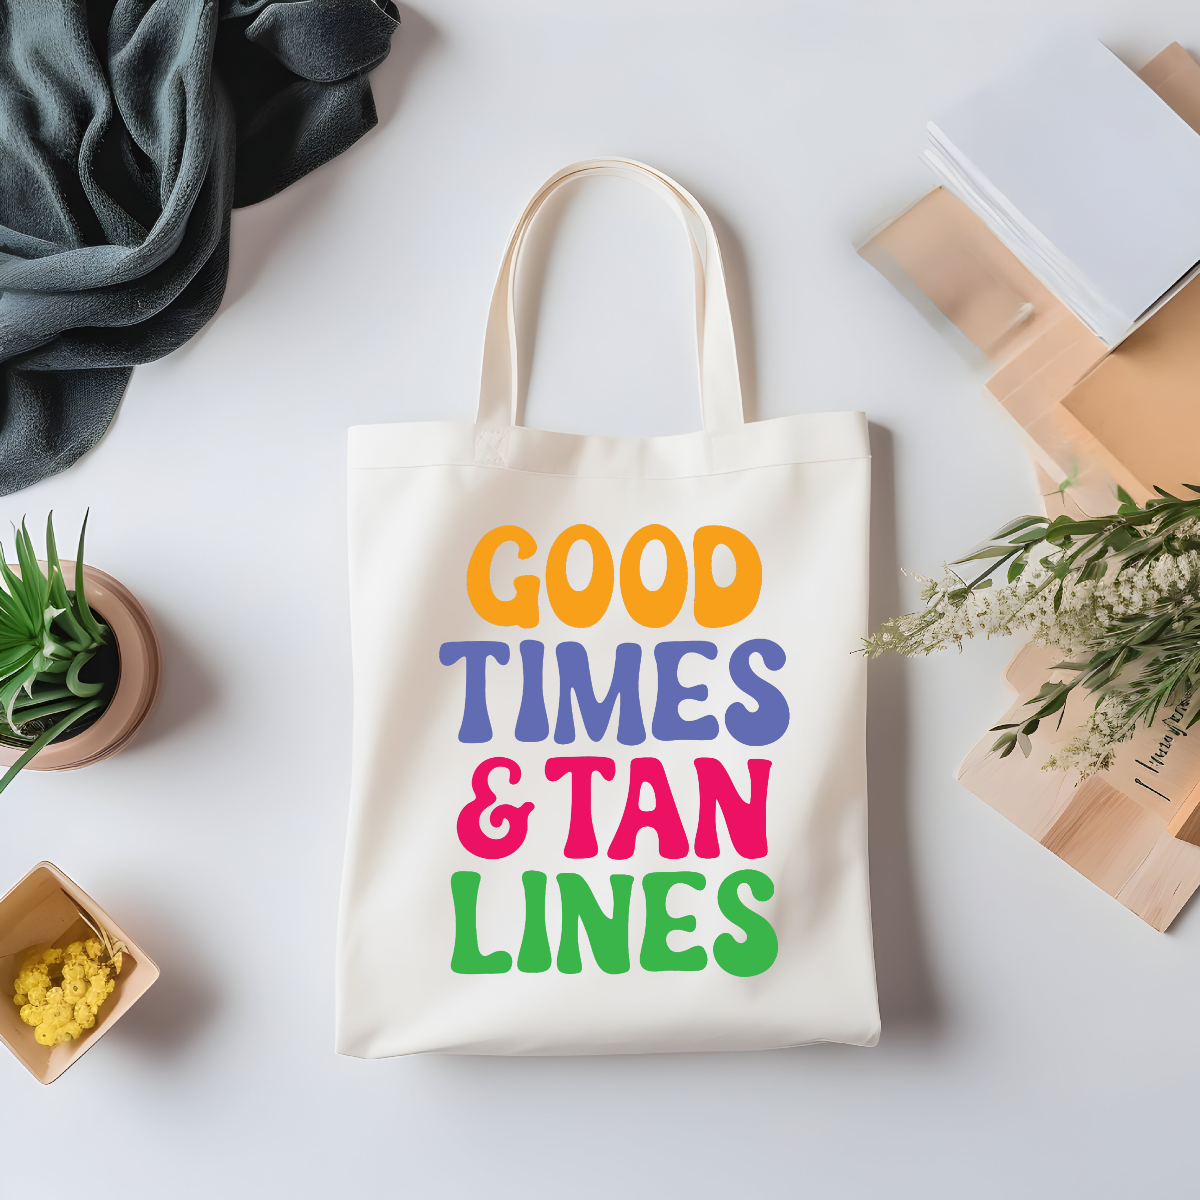 Good Times & Tan Lines Tote